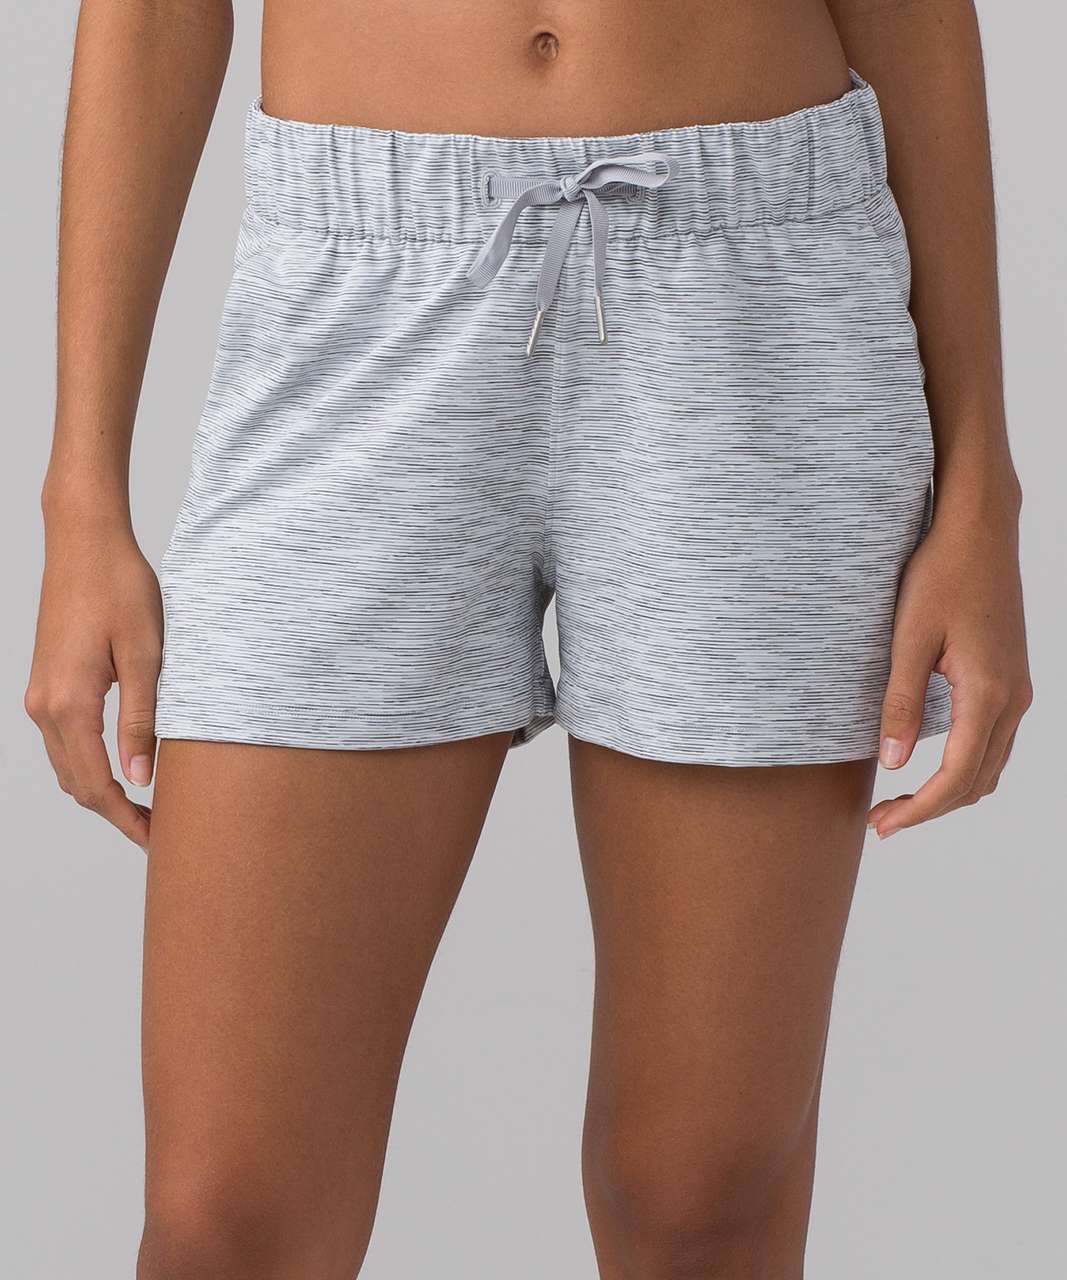 Lululemon On The Fly Short *2.5" - Wee Are From Space Ice Grey Alpine White / Ice Grey